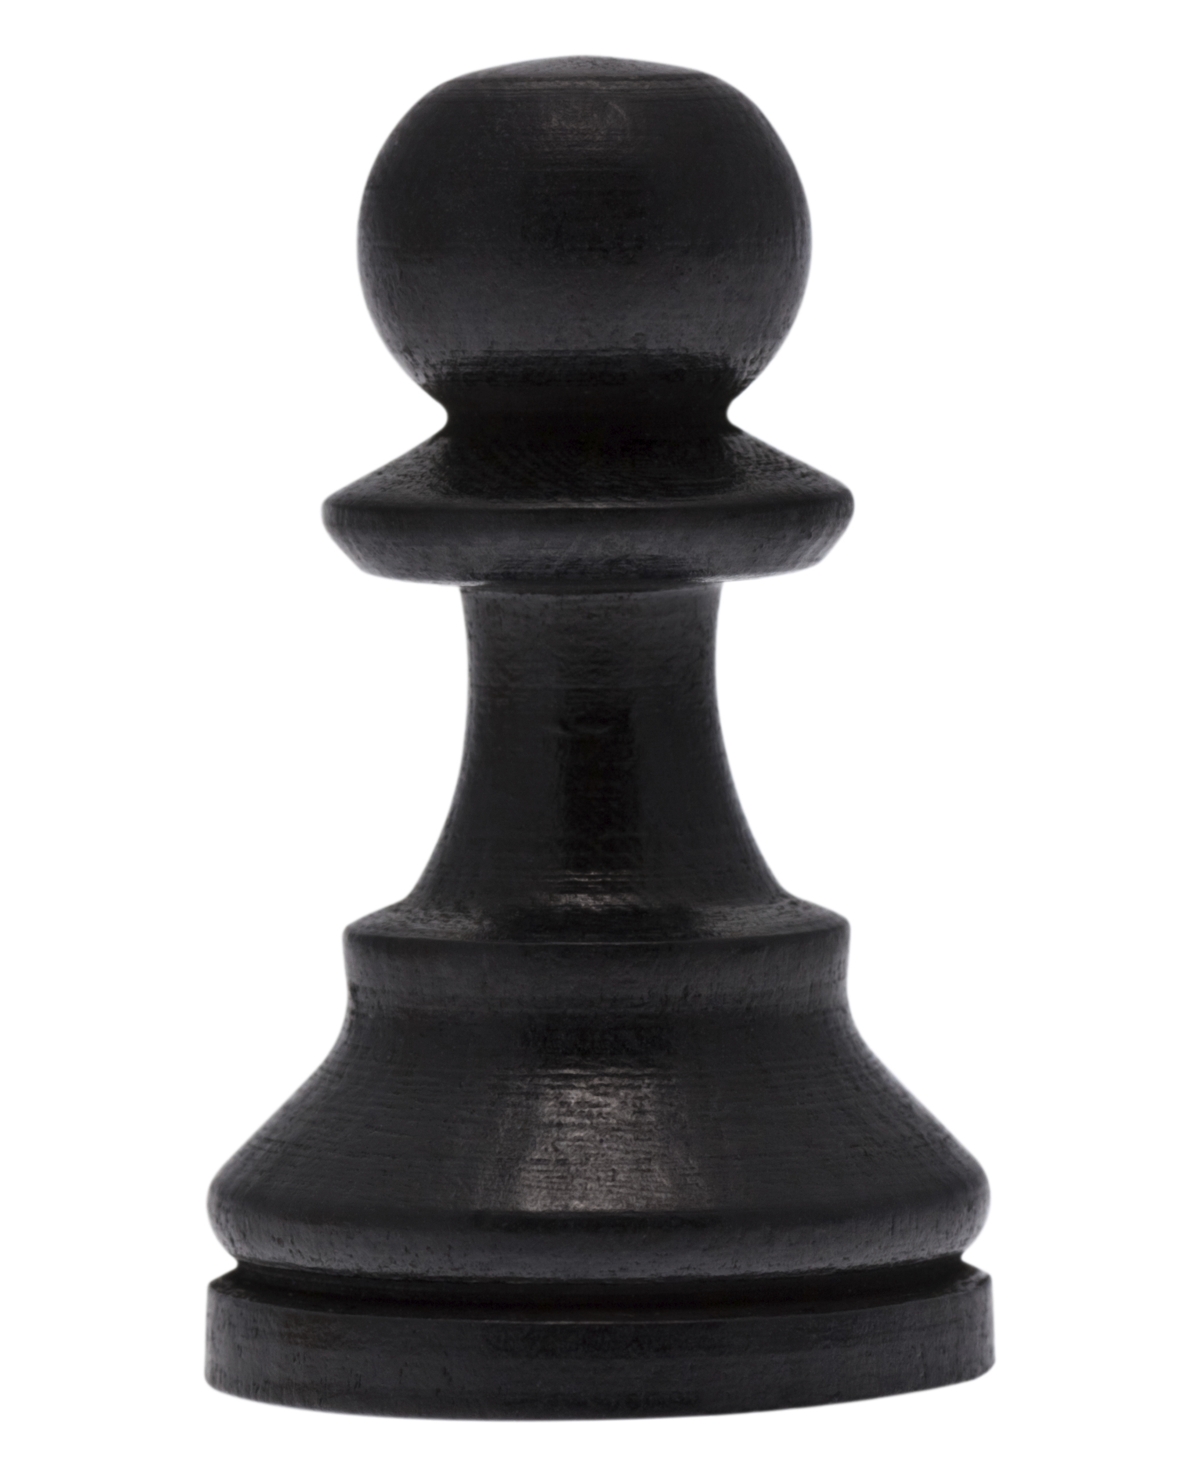 names of chess pieces